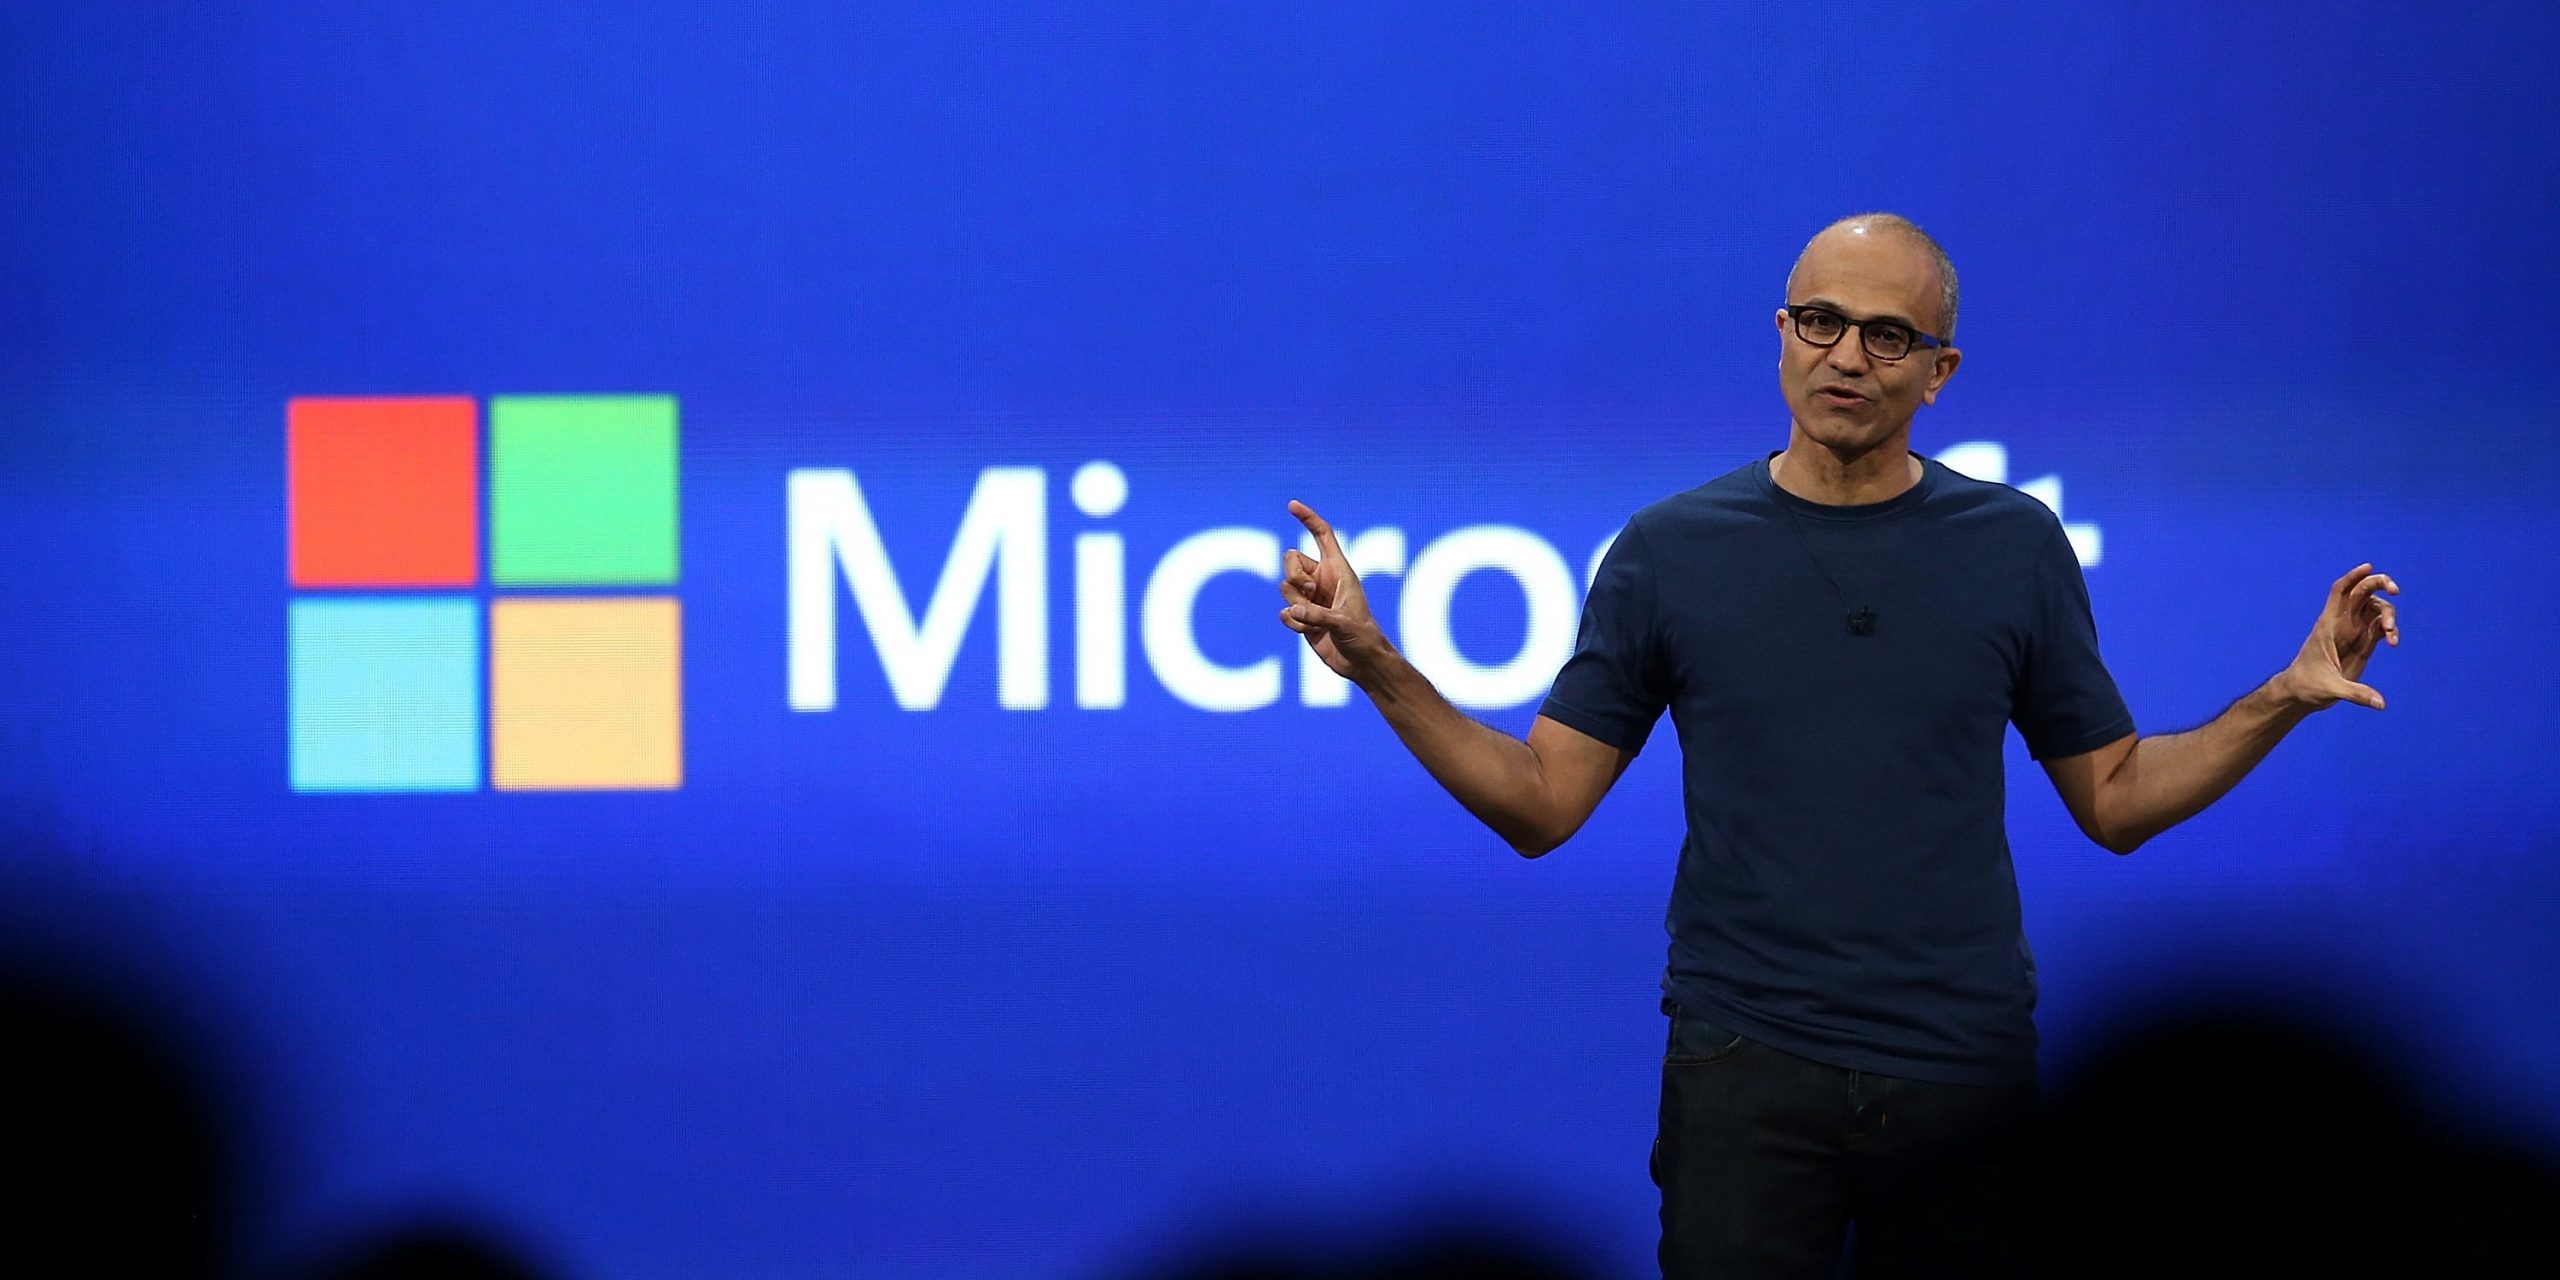 Microsoft CEO Satya Nadella stands on stage and gestures widely with both hands